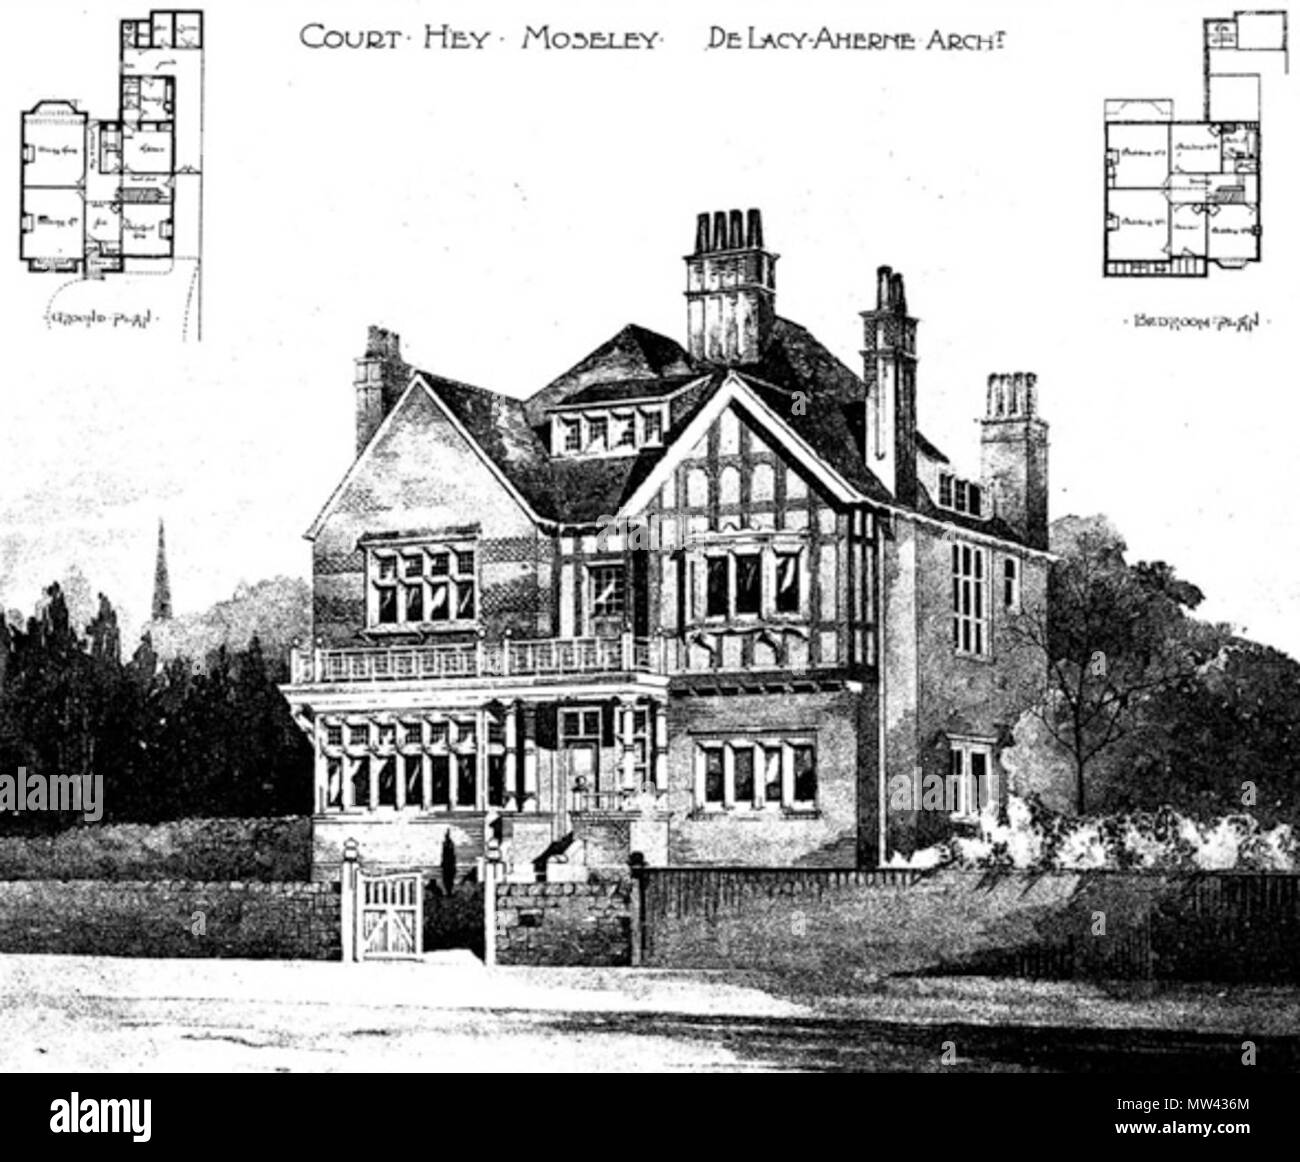 . English: Drawing of Court Hey in Moseley, Birmingham by William de Lacy Aherne, published in The Building News, April 8th 1880 . 20 September 2010, 14:51:26. William de Lacy Aherne 145 Court Hey, Moseley - William De Lacy Aherne Stock Photo